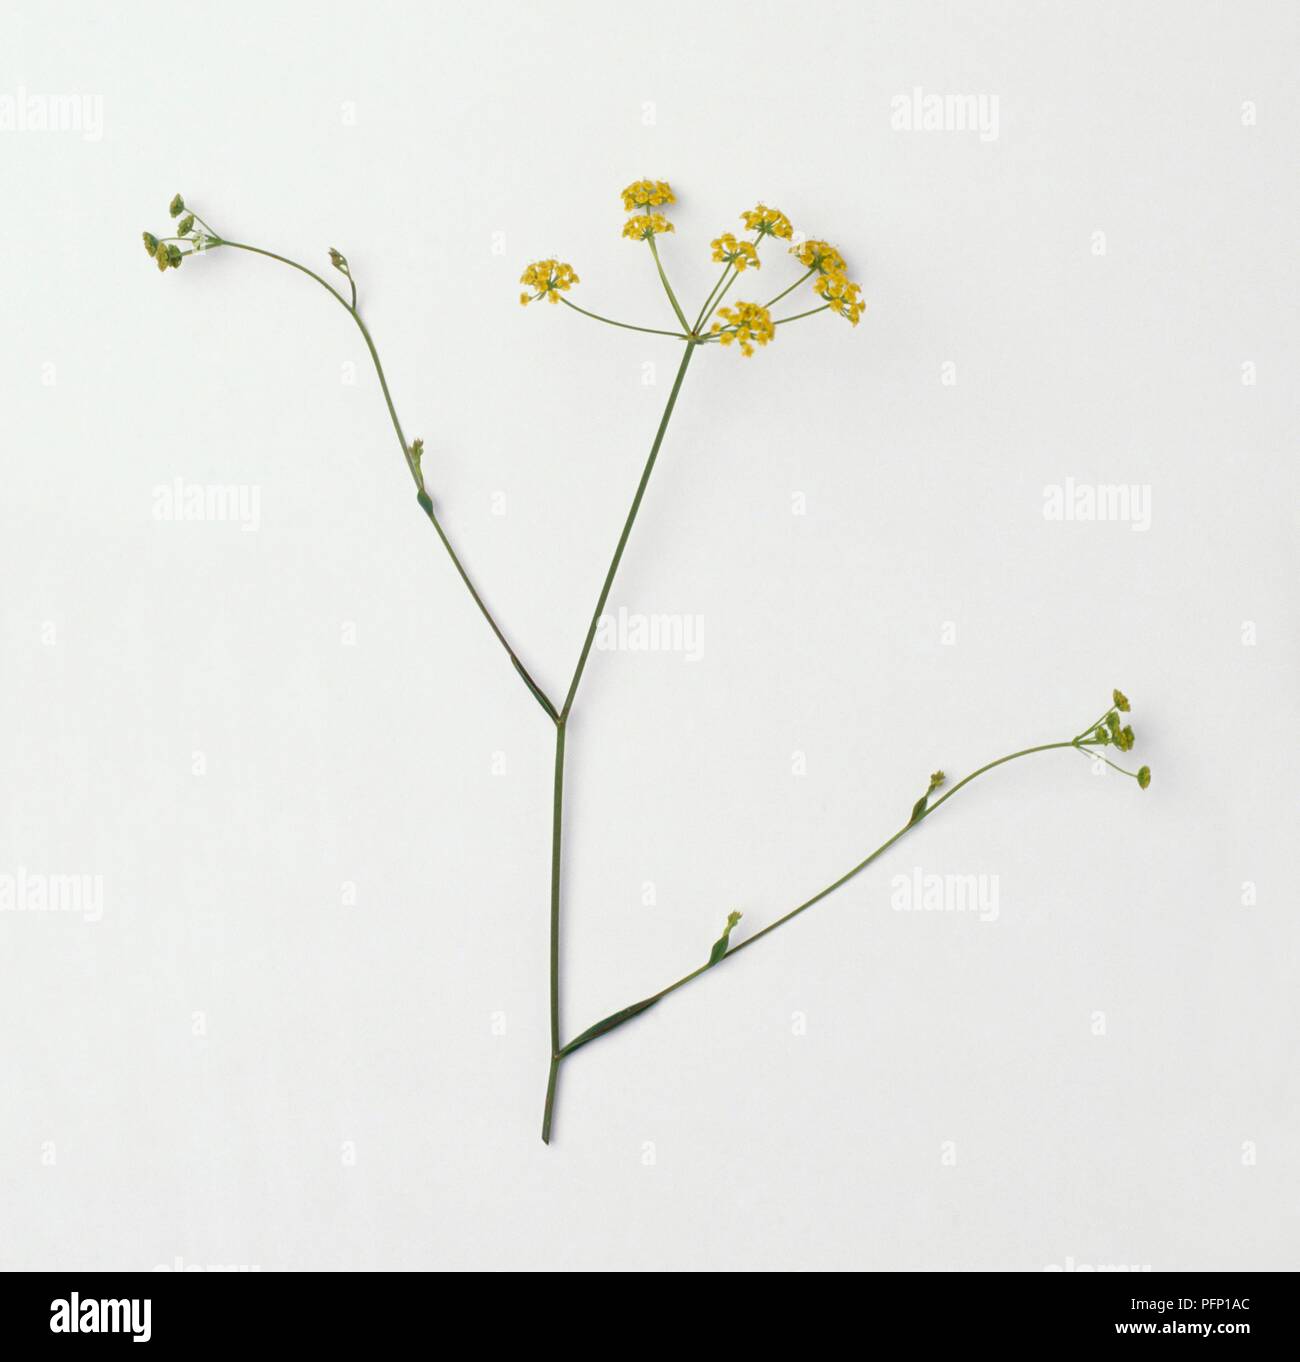 Bupleurum falcatum (Sickle hare's ear), stem with leaf bracts and umbel of yellow flowers Stock Photo